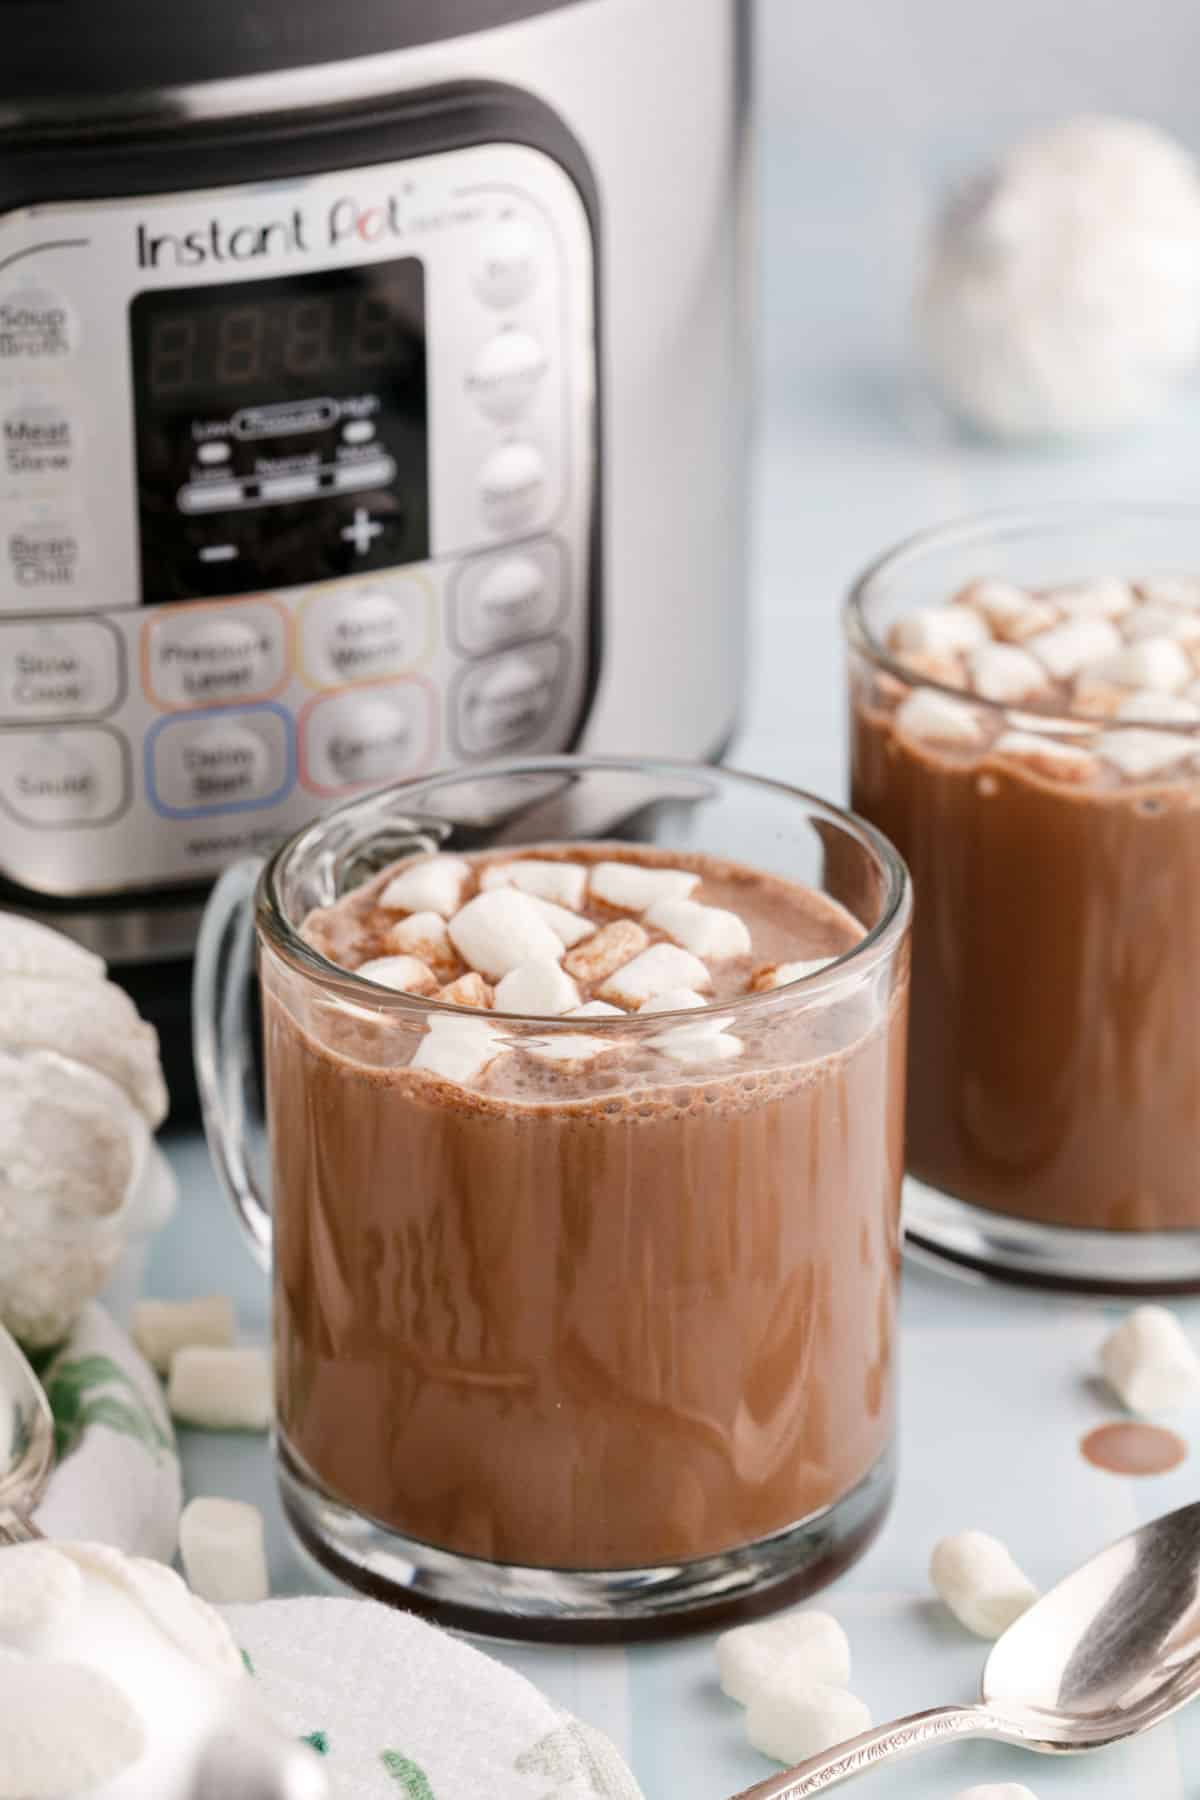 Two clear glass mugs of hot chocolate and marshmallows with Instant Pot in background.